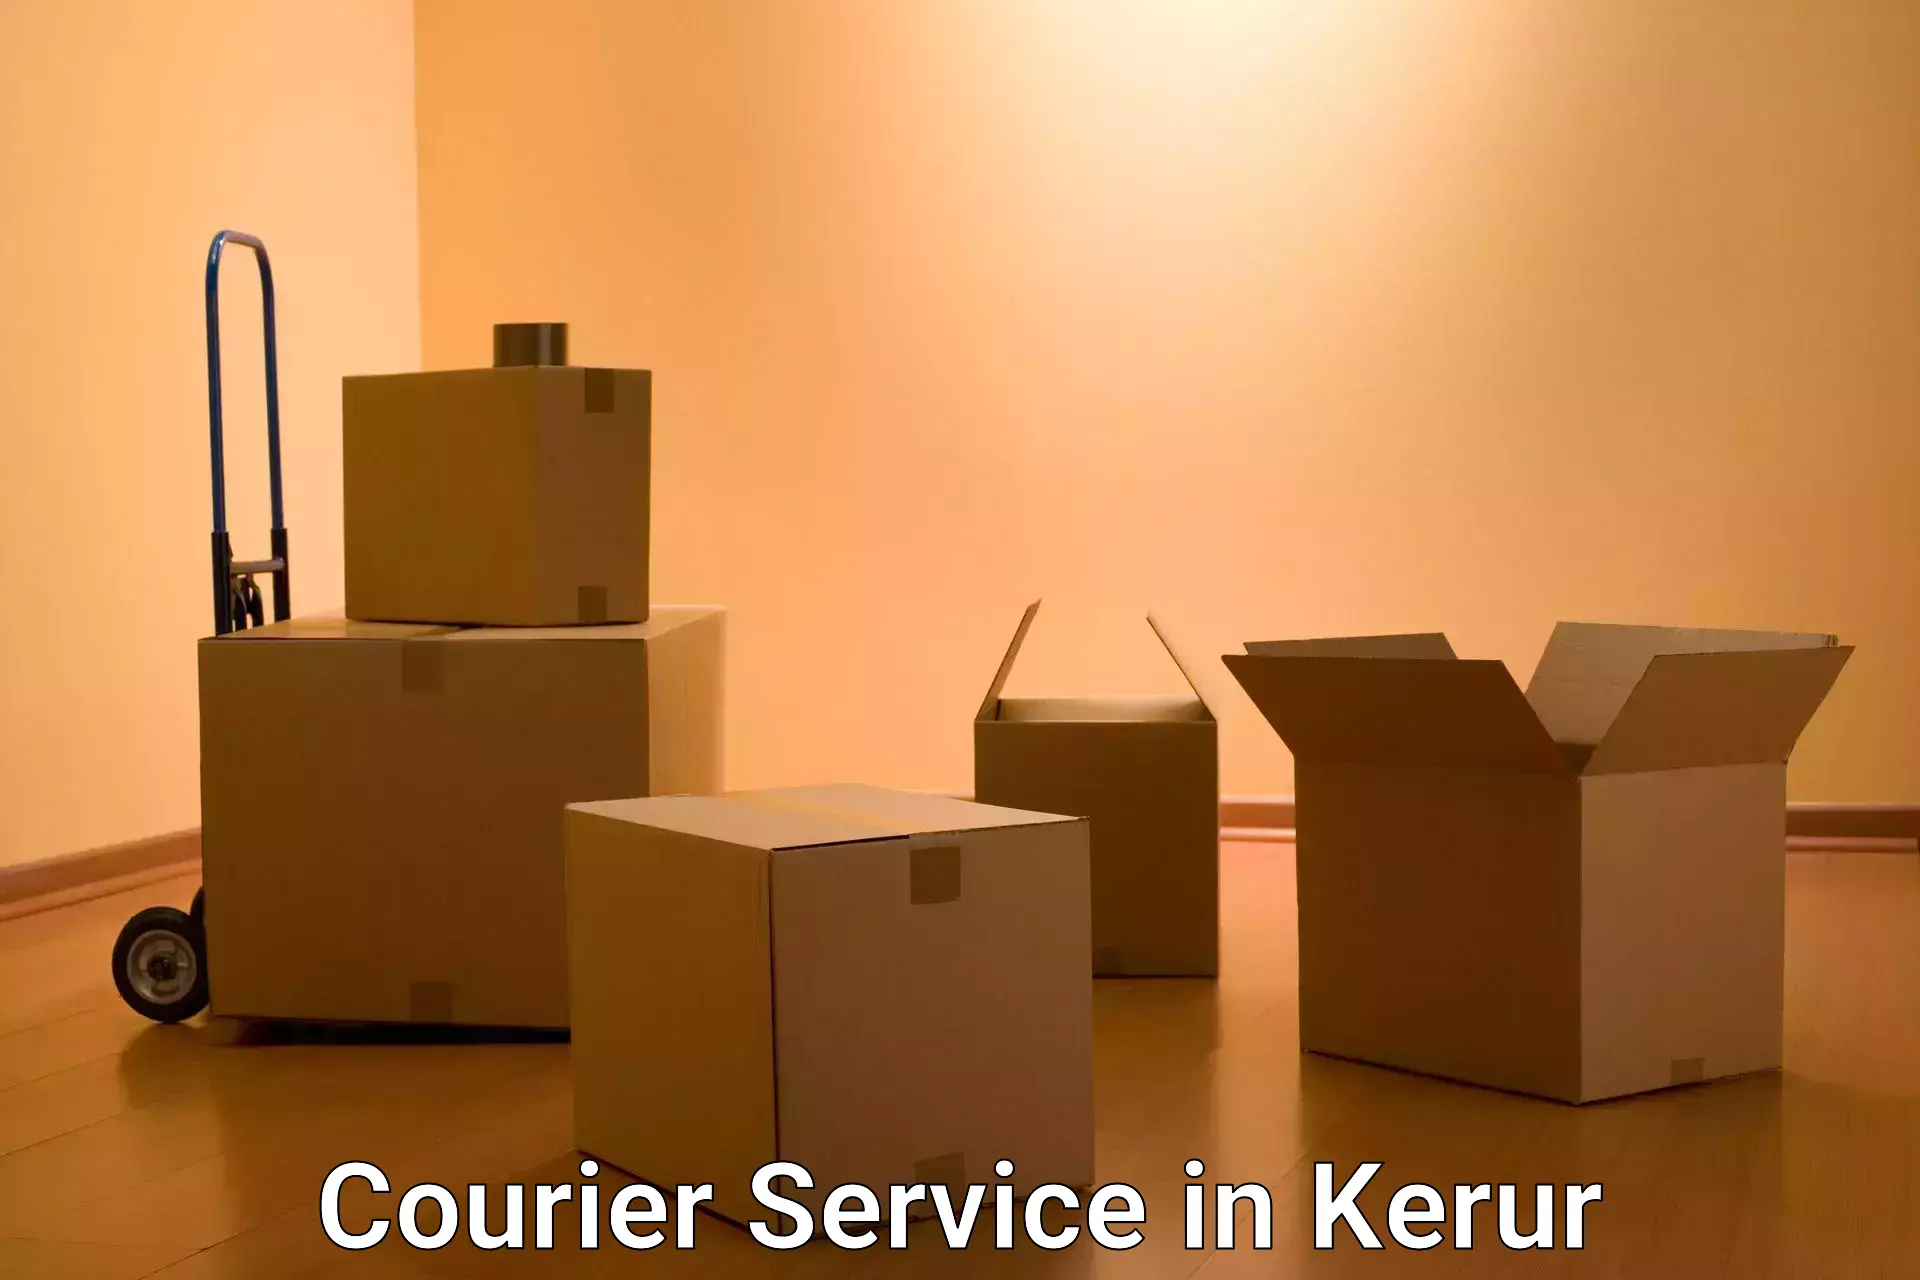 Courier service innovation in Kerur